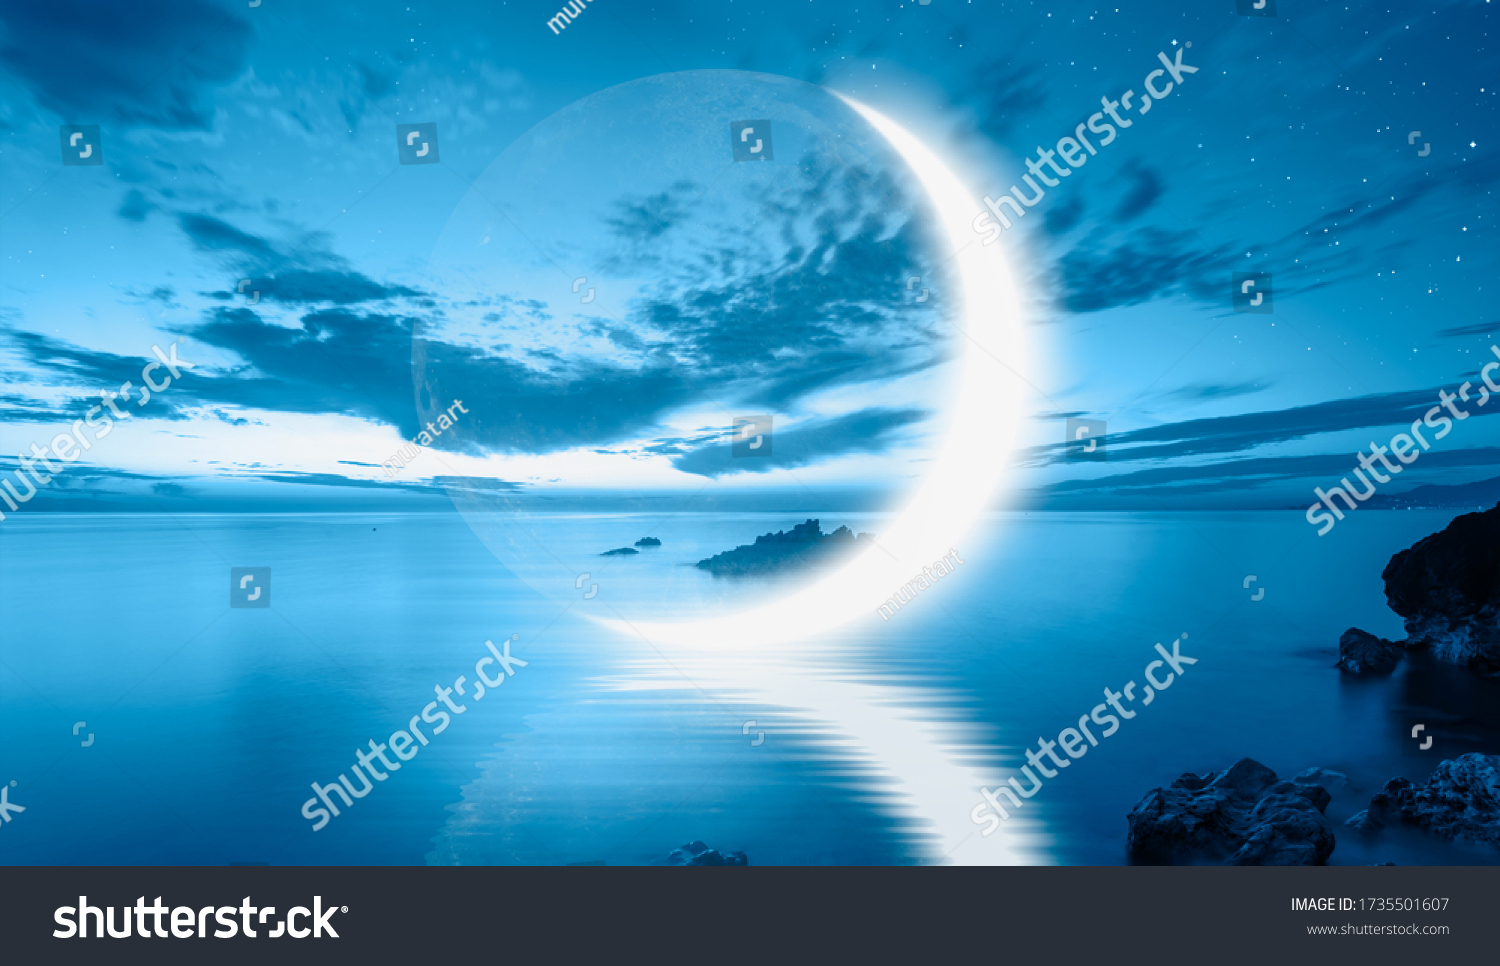 Abstract blue background with crescent moon over the sea,  lot of stars in the background at night  #1735501607